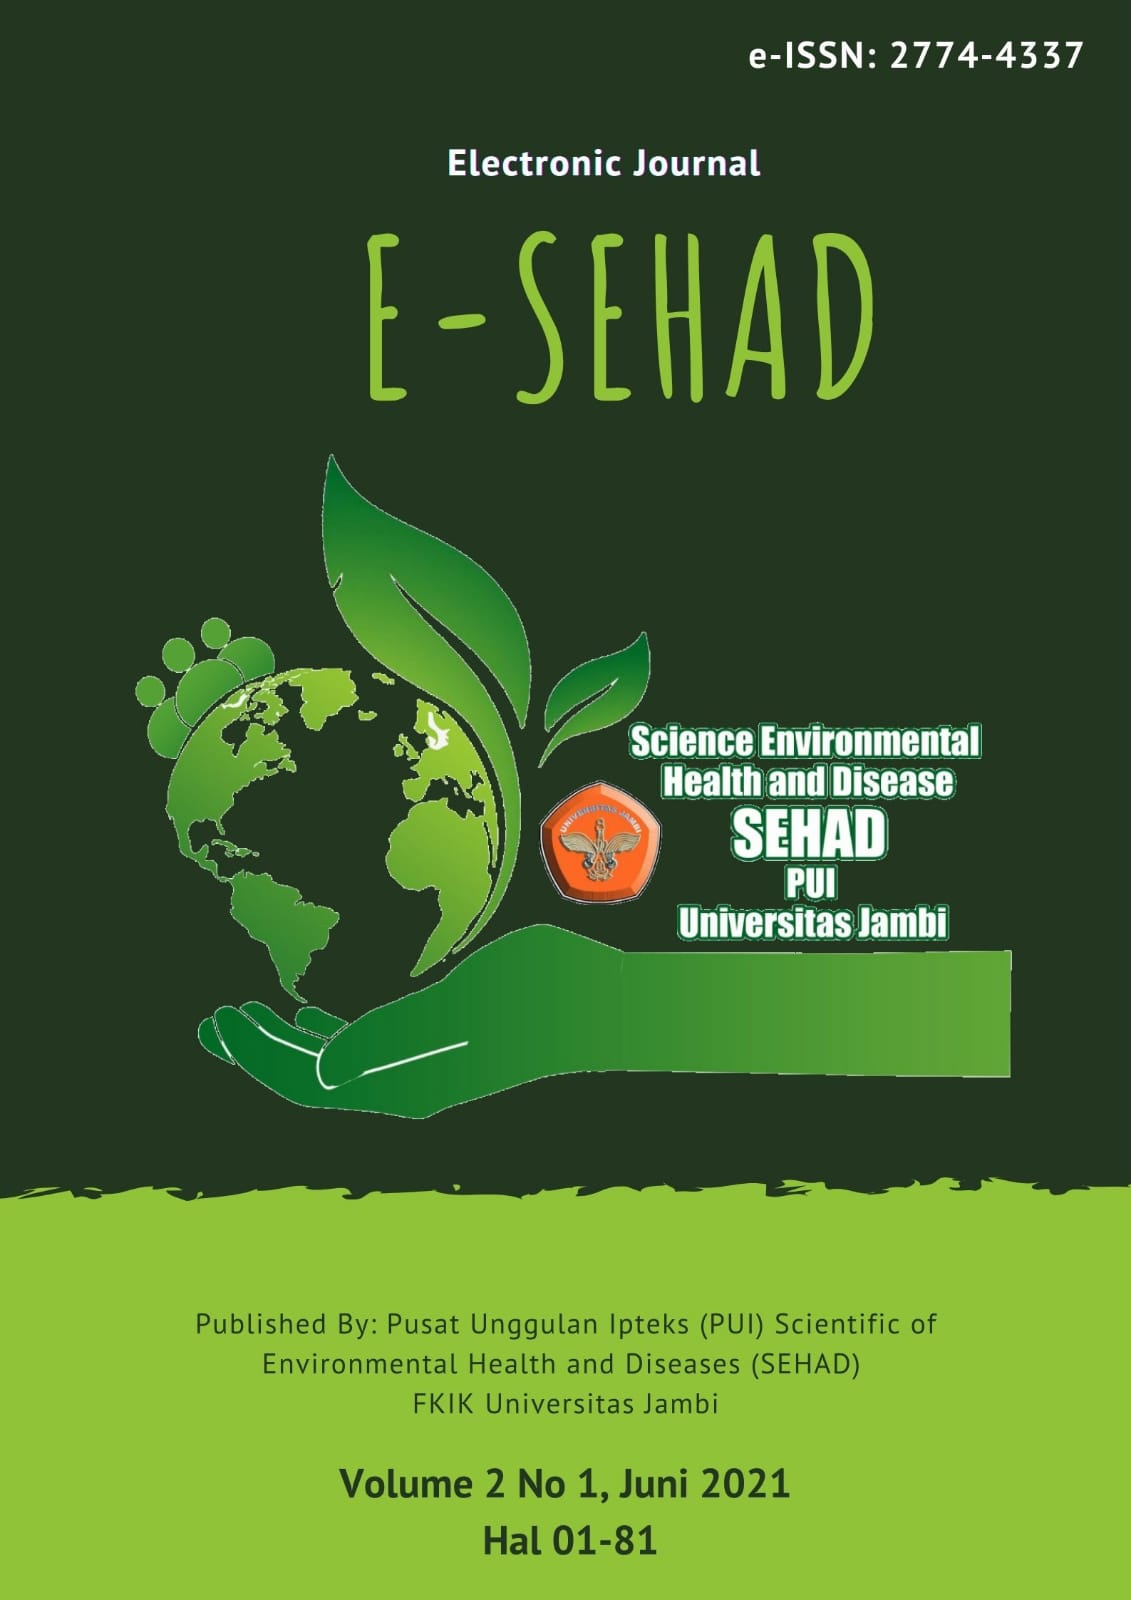 					Lihat Vol 2 No 1 (2021): Electronic Journal Scientific of Envitonmental Health And Diseases (e-SEHAD)
				